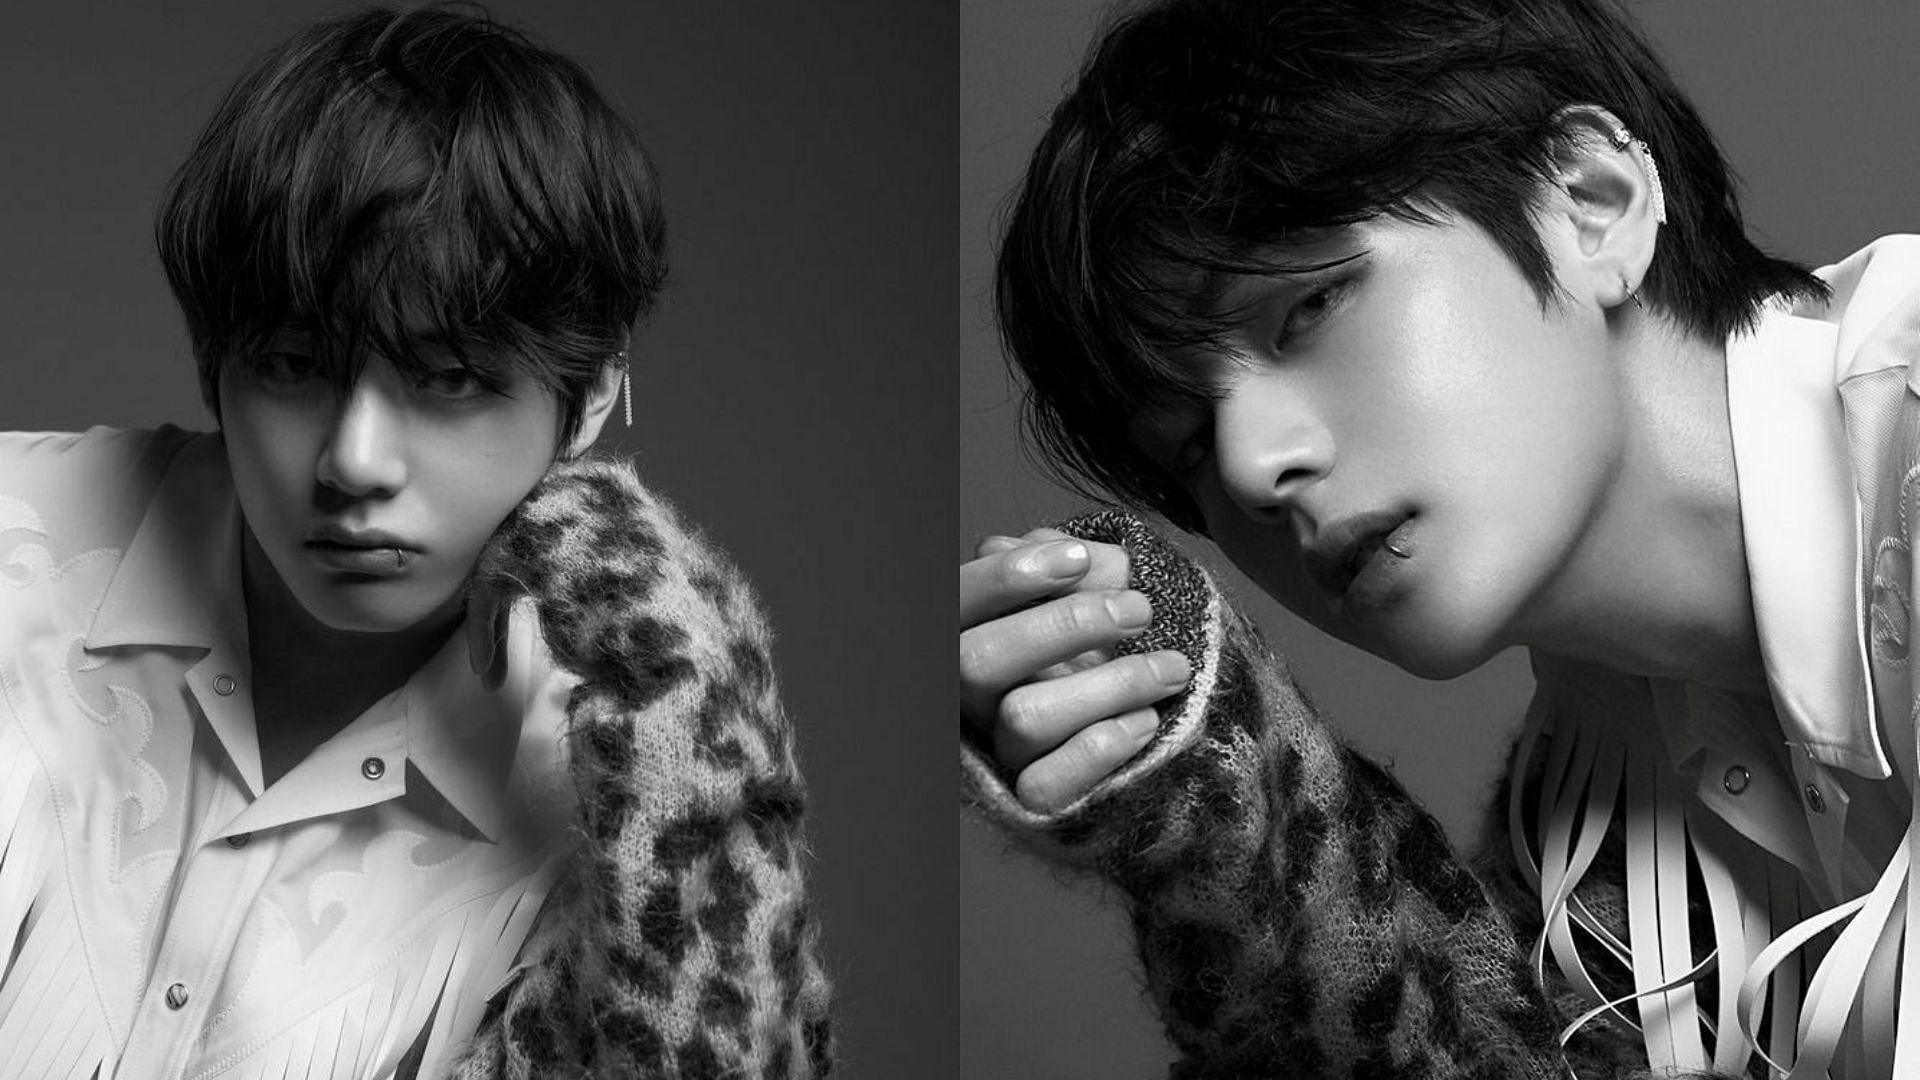 Stills from the photo album for Love Yourself: Tear (Images via BIGHIT MUSIC)